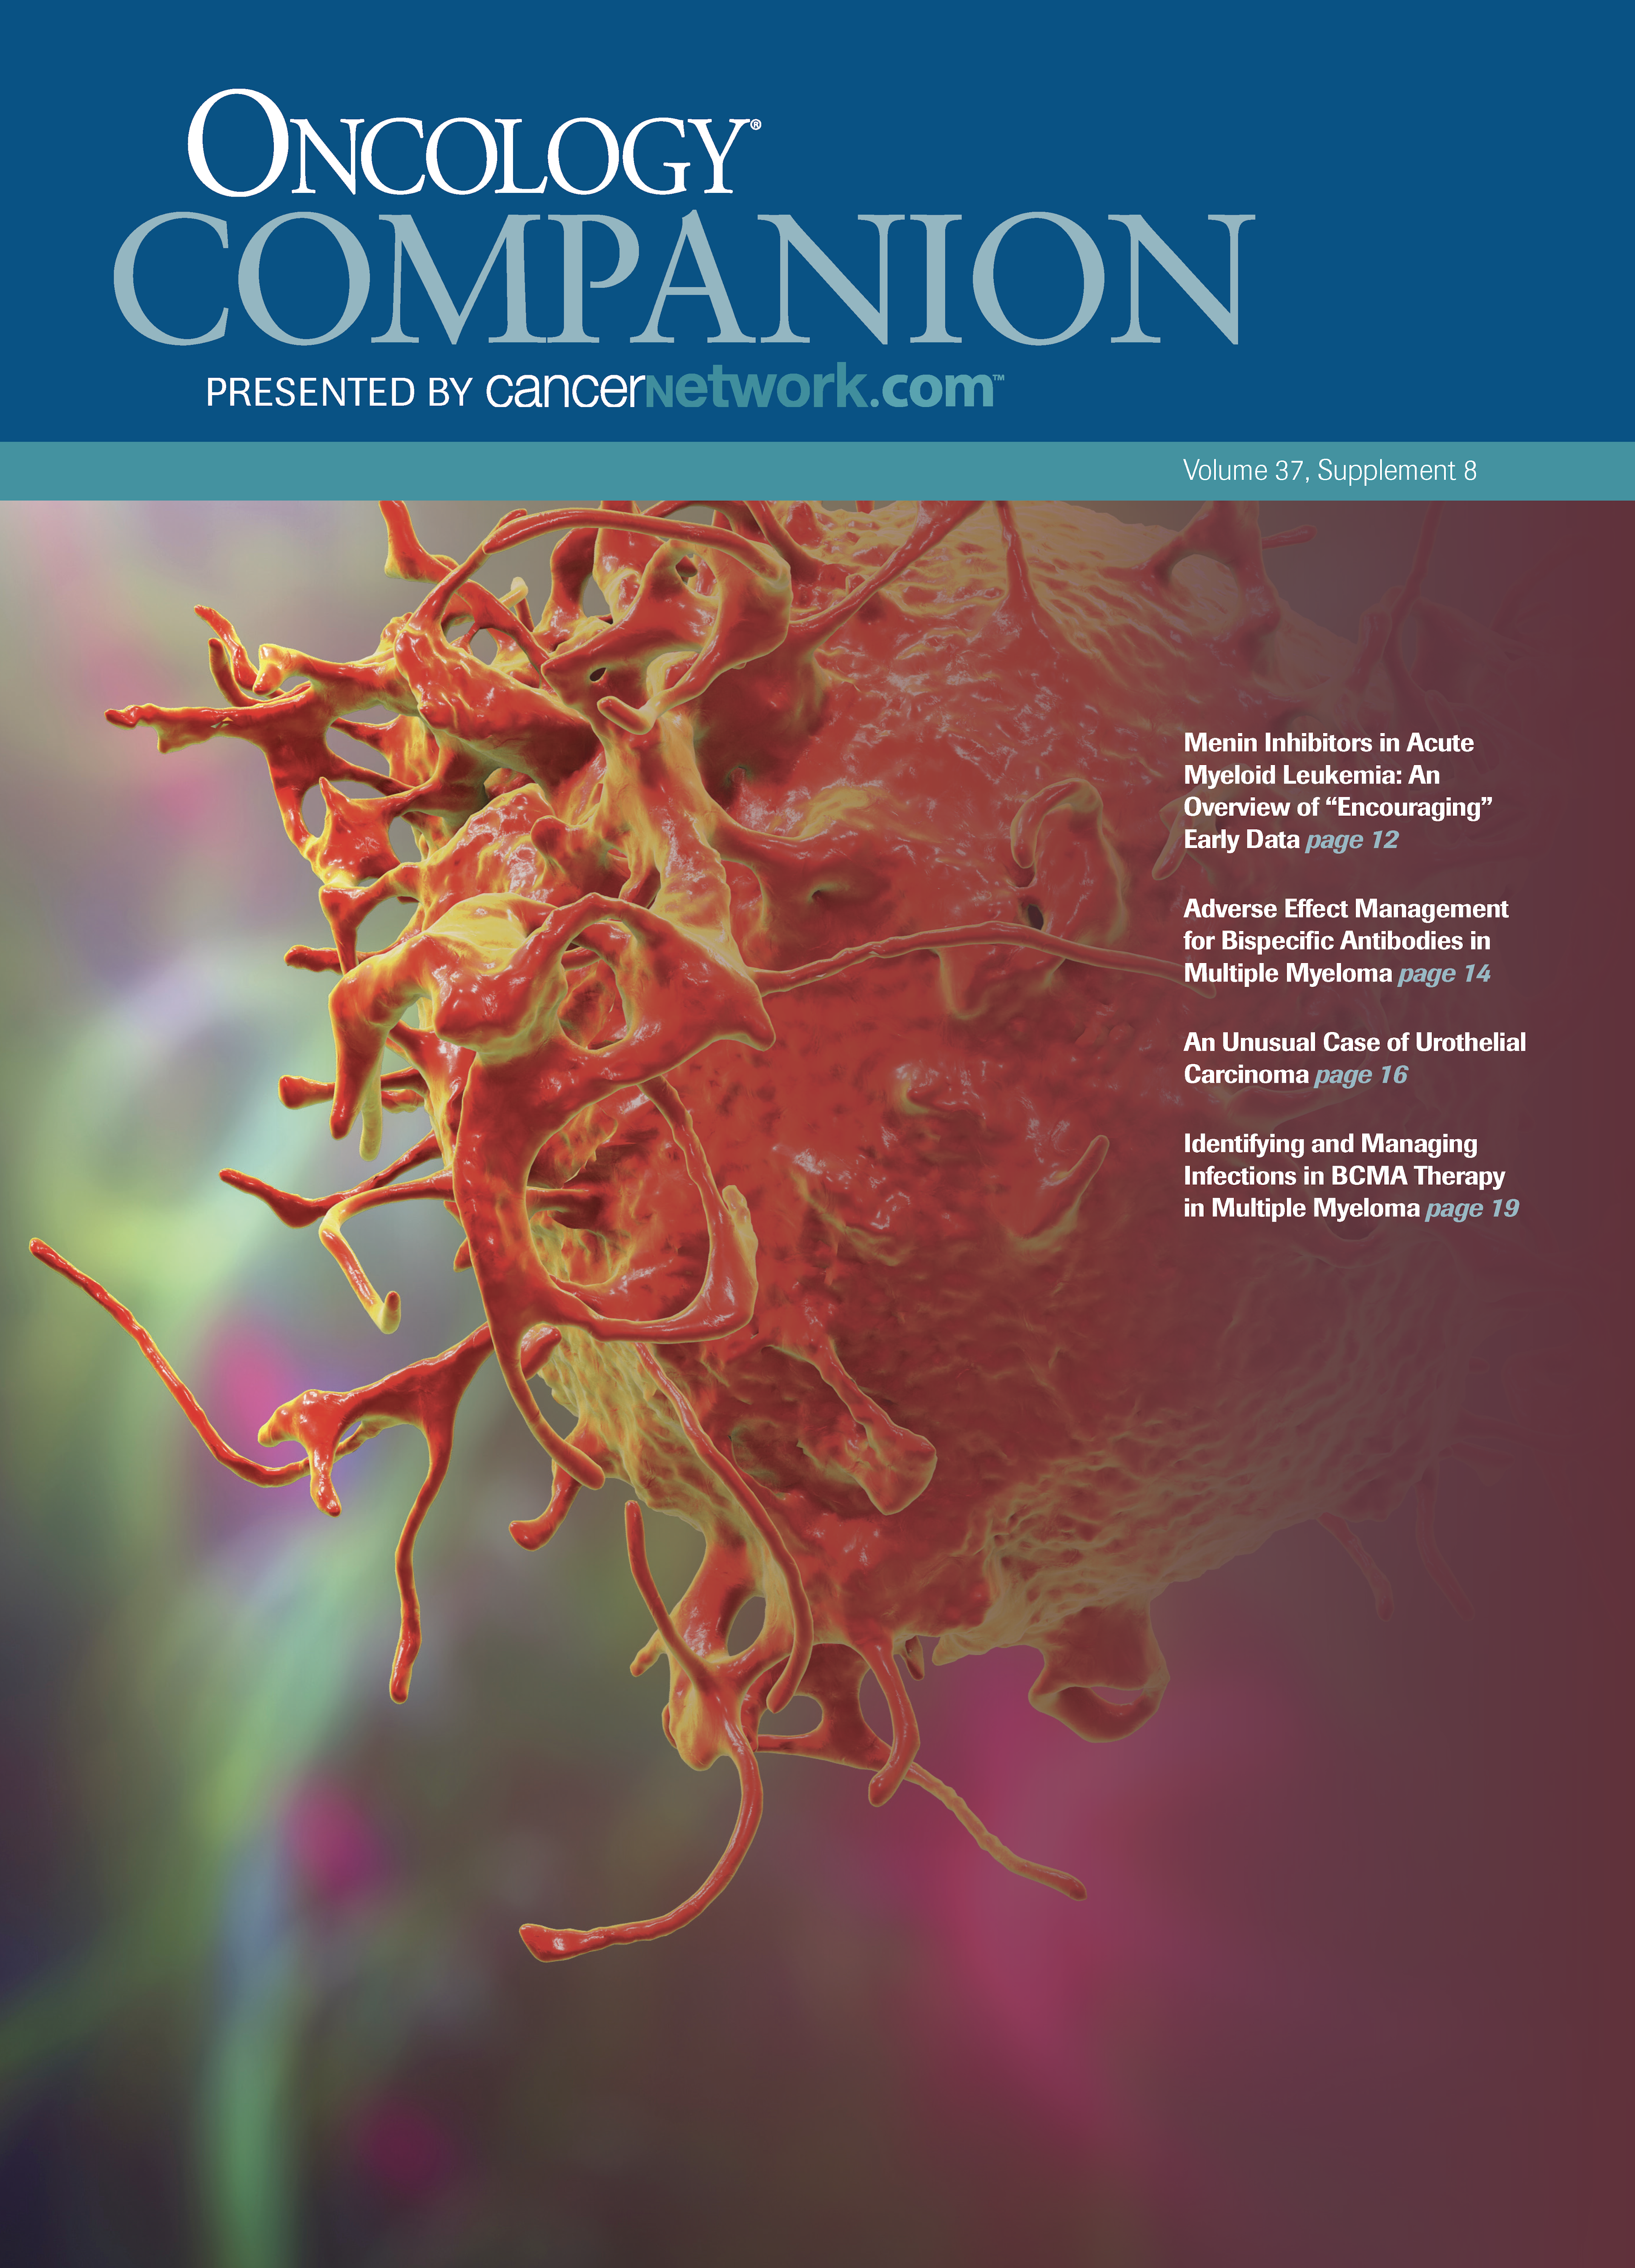 ONCOLOGY® Companion, Volume 37, Supplement 8